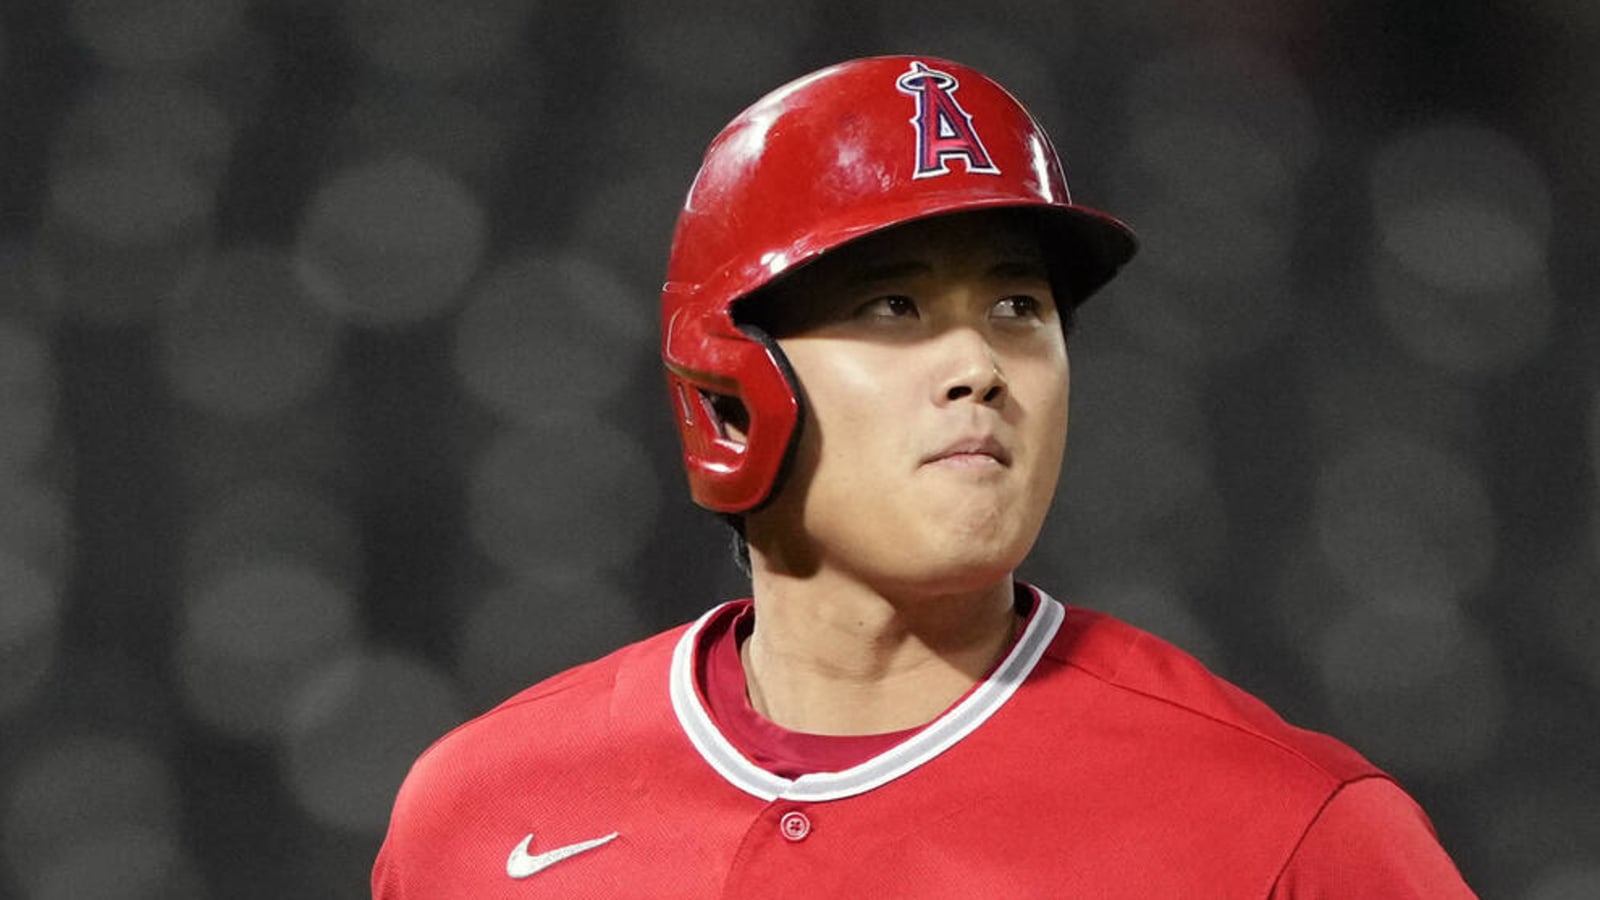 Angels manager has warning for MLB about Ohtani